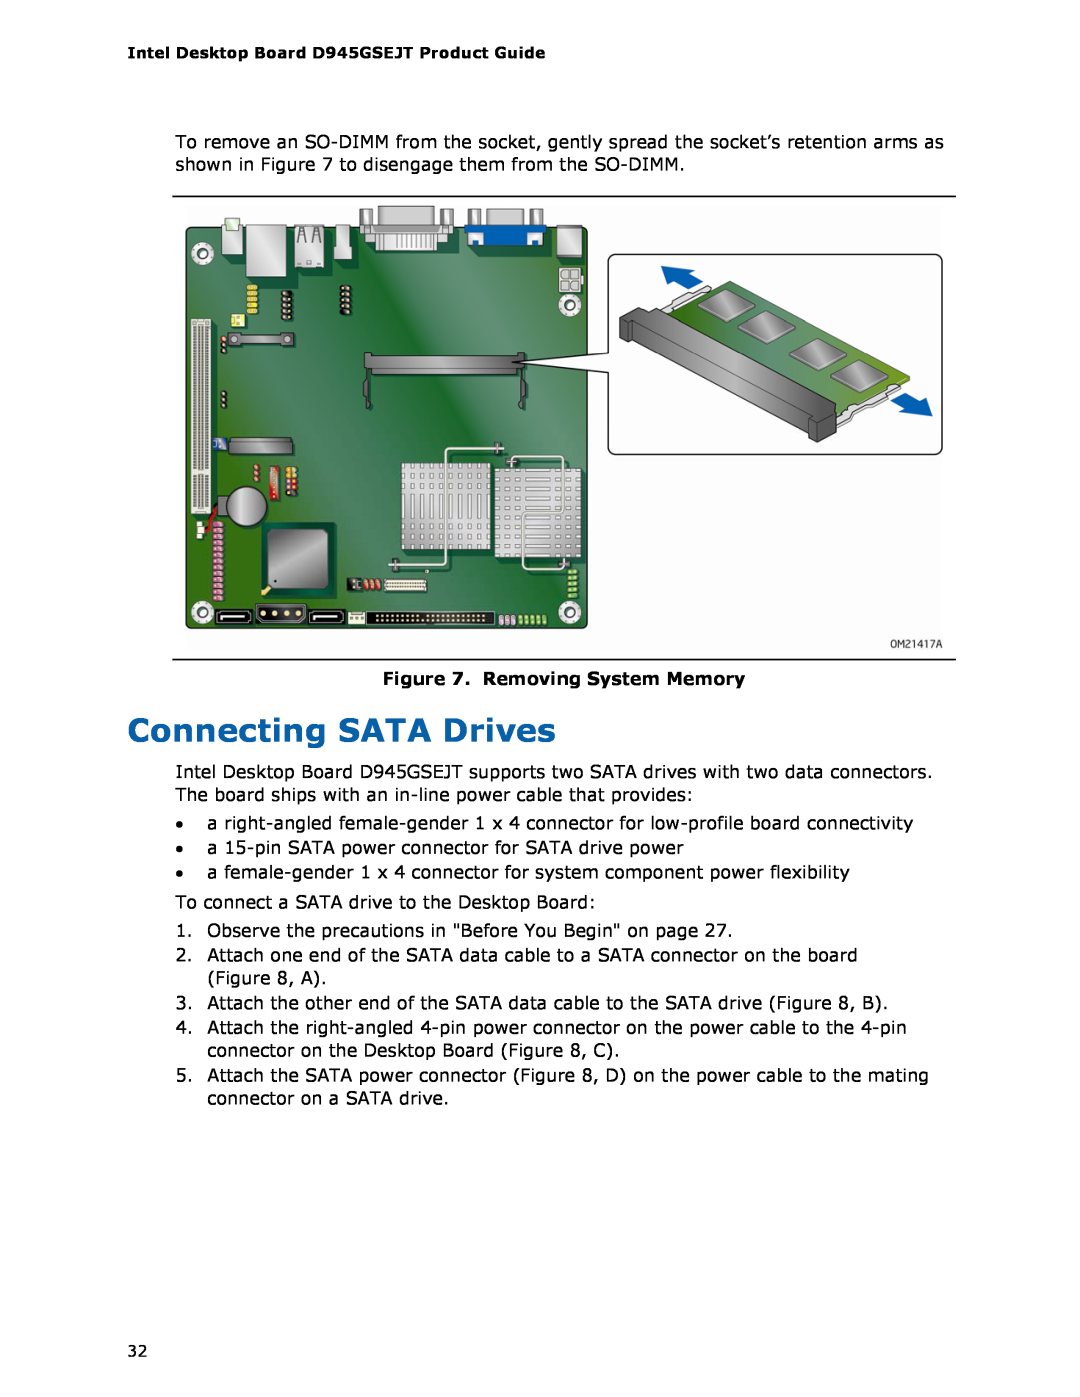 Intel D945GSEJT manual Connecting SATA Drives, Removing System Memory 